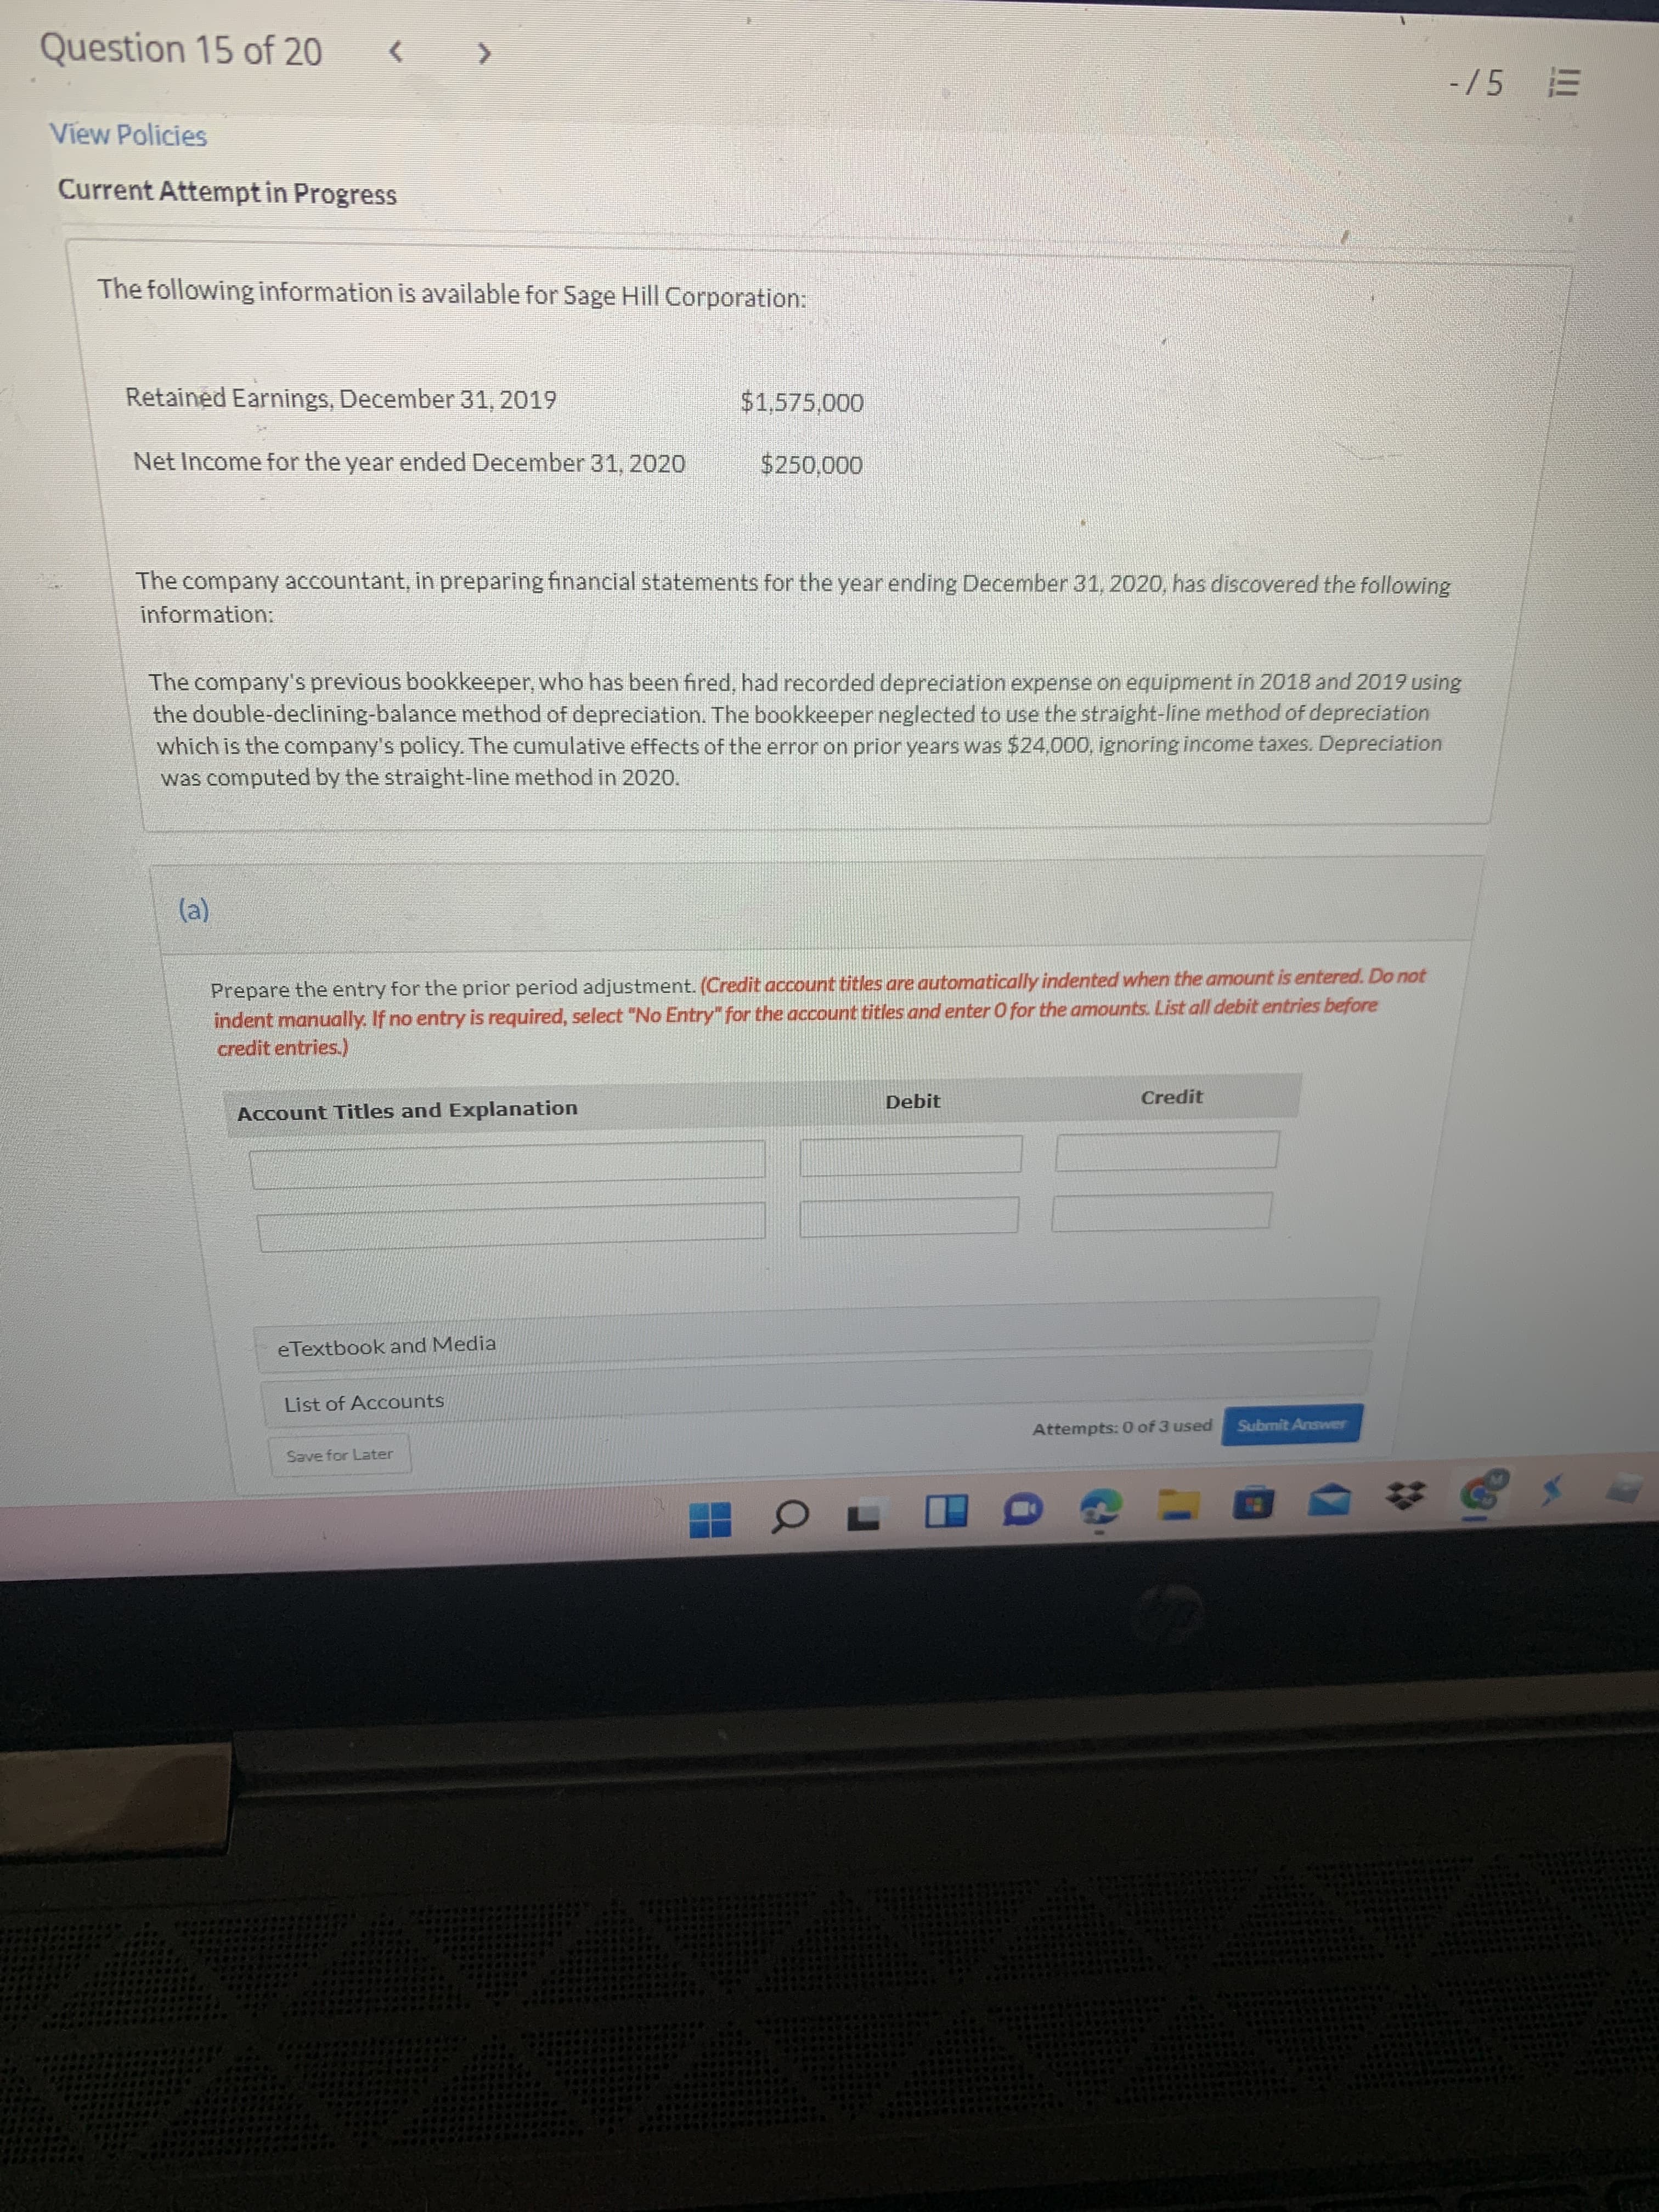 Question 15 of 20
<.
-/5
View Policies
Current Attempt in Progress
The following information is available for Sage Hill Corporation:
Retained Earnings, December 31, 2019
$1,575,000
Net Income for the year ended December 31, 2020
$250,000
The company accountant, in preparing financial statements for the year ending December 31, 2020, has discovered the following
information:
The company's previous bookkeeper, who has been fired, had recorded depreciation expense on equipment in 2018 and 2019 using
the double-declining-balance method of depreciation. The bookkeeper neglected to use the straight-line method of depreciation
which is the company's policy. The cumulative effects of the error on prior years was $24,000, ignoring income taxes. Depreciation
was computed by the straight-line method in 2020.
Prepare the entry for the prior period adjustment. (Credit account titles are automatically indented when the amount is entered. Do not
indent manually. If no entry is required, select "No Entry" for the account titles and enter O for the amounts. List all debit entries before
credit entries.)
Debit
Credit
Account Titles and Explanation
eTextbook and Media
List of Accounts
Attempts: 0 of 3 used
Submit Answer
Save for Later
